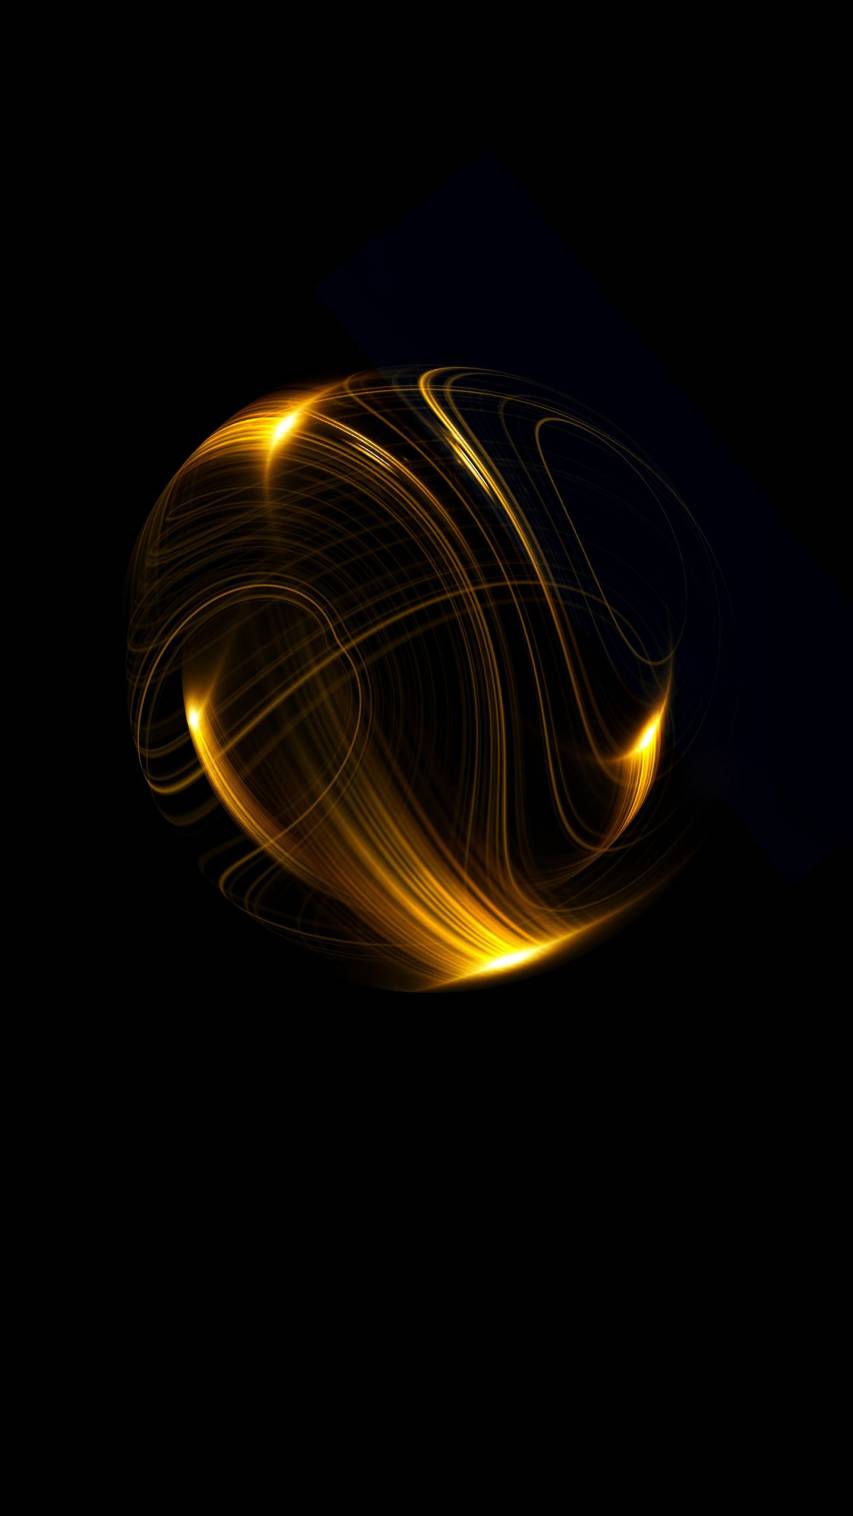 Golden, Black Amoled Android hd Backgrounds image